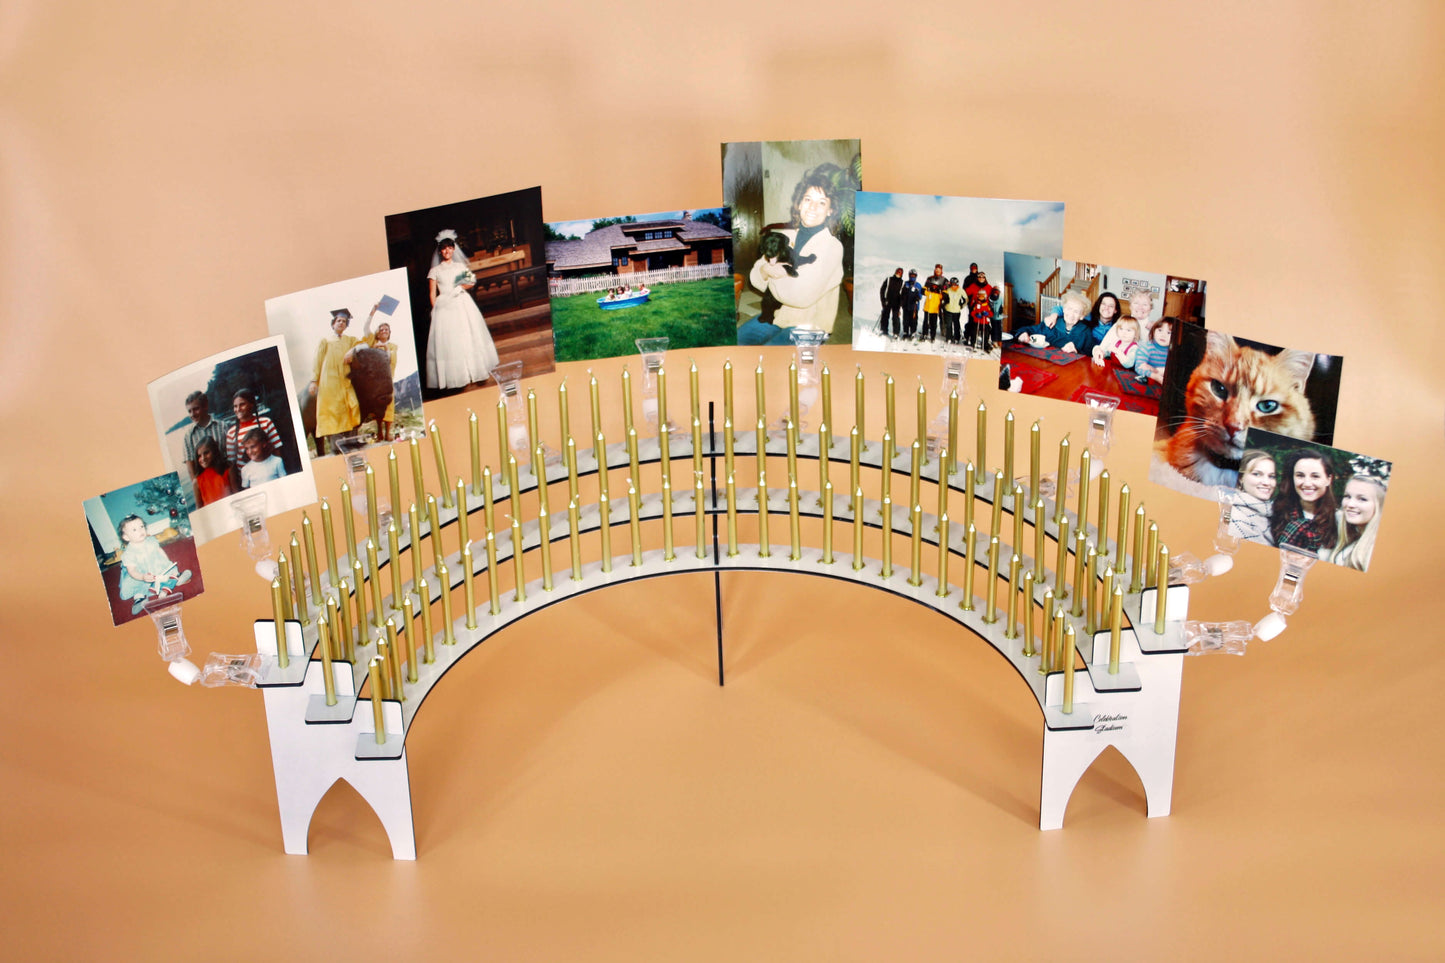 Birthday Party Decorations Using Stadium Clips on the Candelabra, Featuring Photos Of Birthday Person's Life